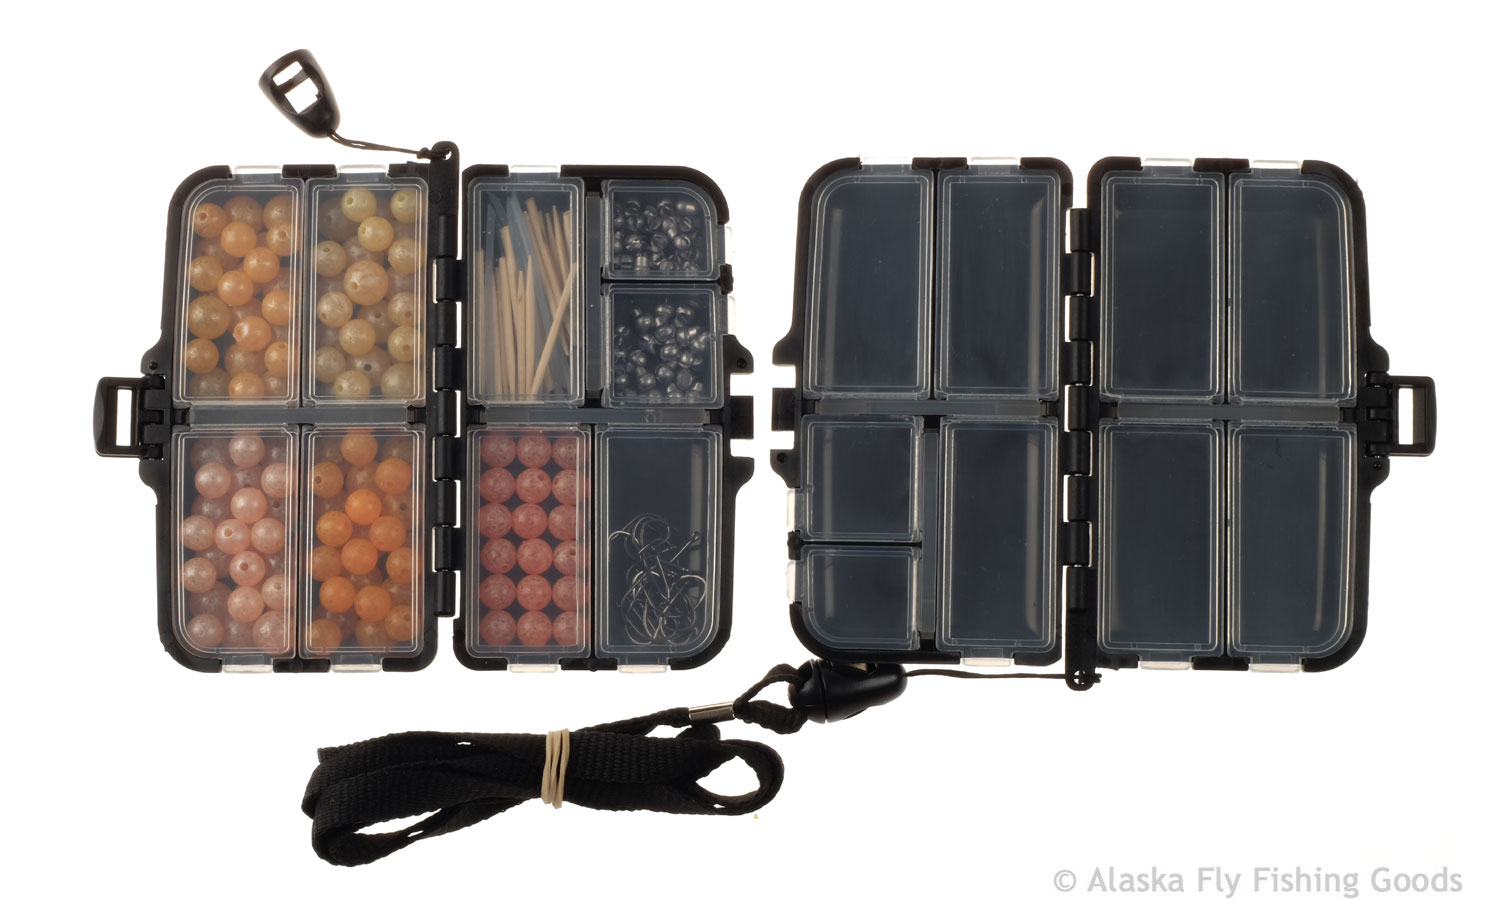 Medium Bead Box with 9 Compartments - Bead Hooks, Pegs and Accessories -  Alaska Fly Fishing Goods